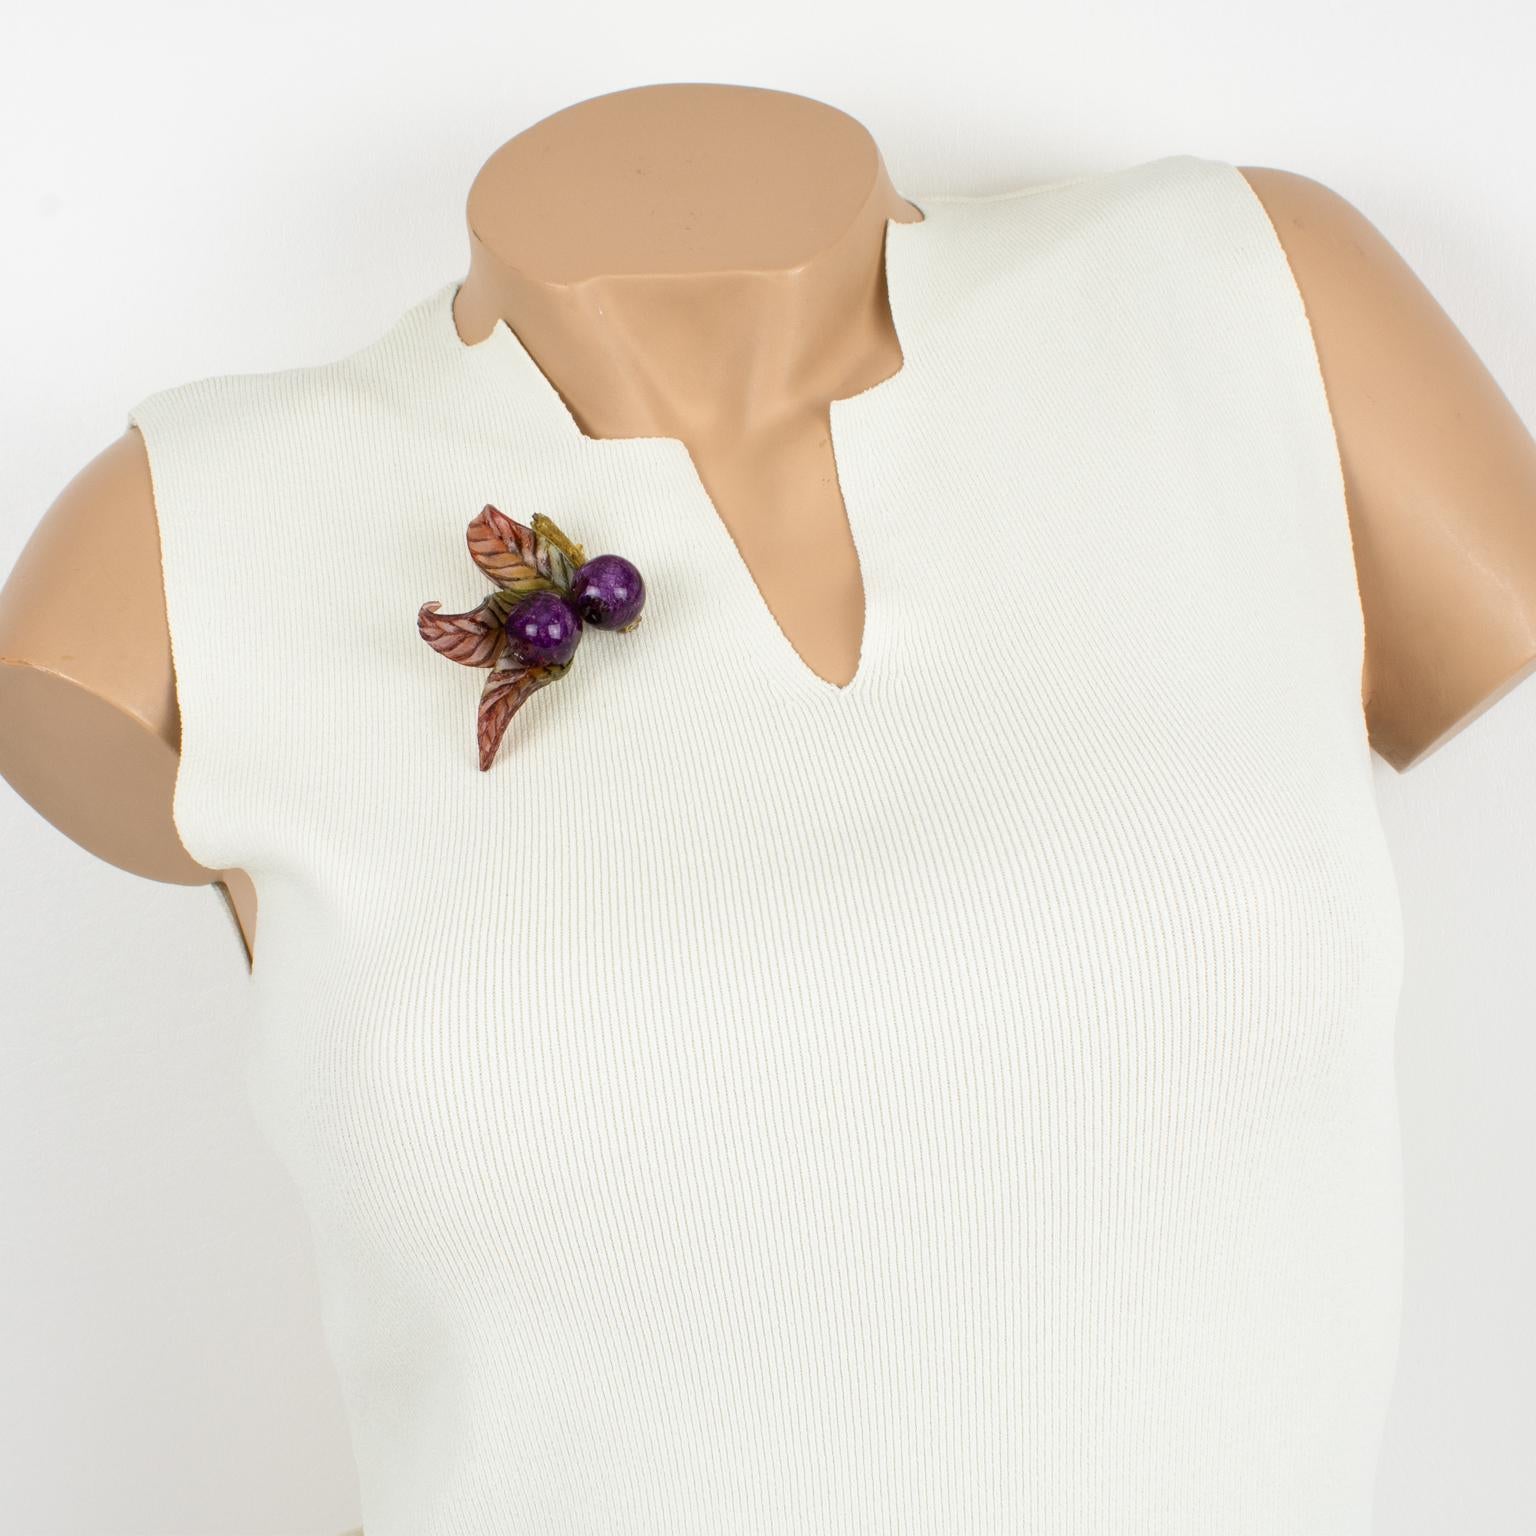 Stunning dimensional floral pin brooch designed by Cilea Paris. This elegant hand-made artisanal resin brooch features colorful berries and leaves in assorted colors of purple, red, green, and rust to form a powerful statement piece. The signature